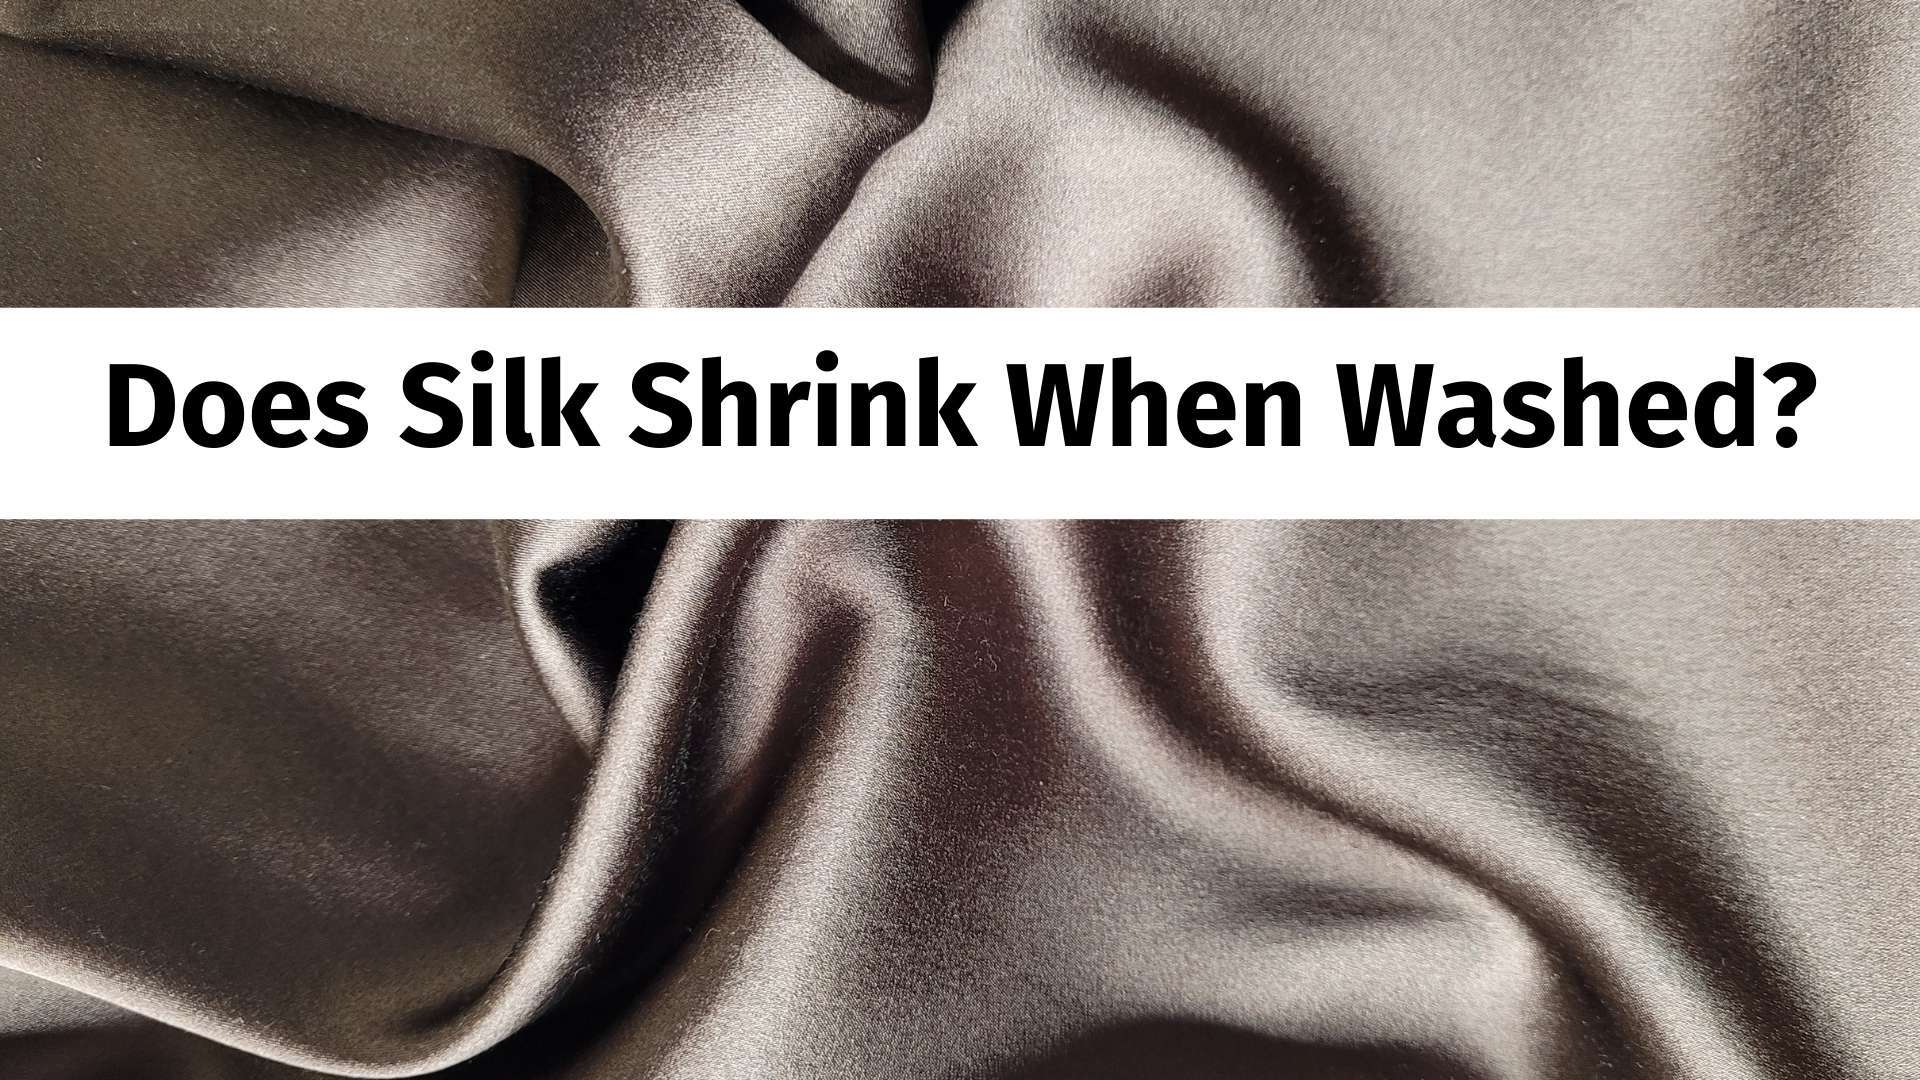 does silk shrink when washed banner image